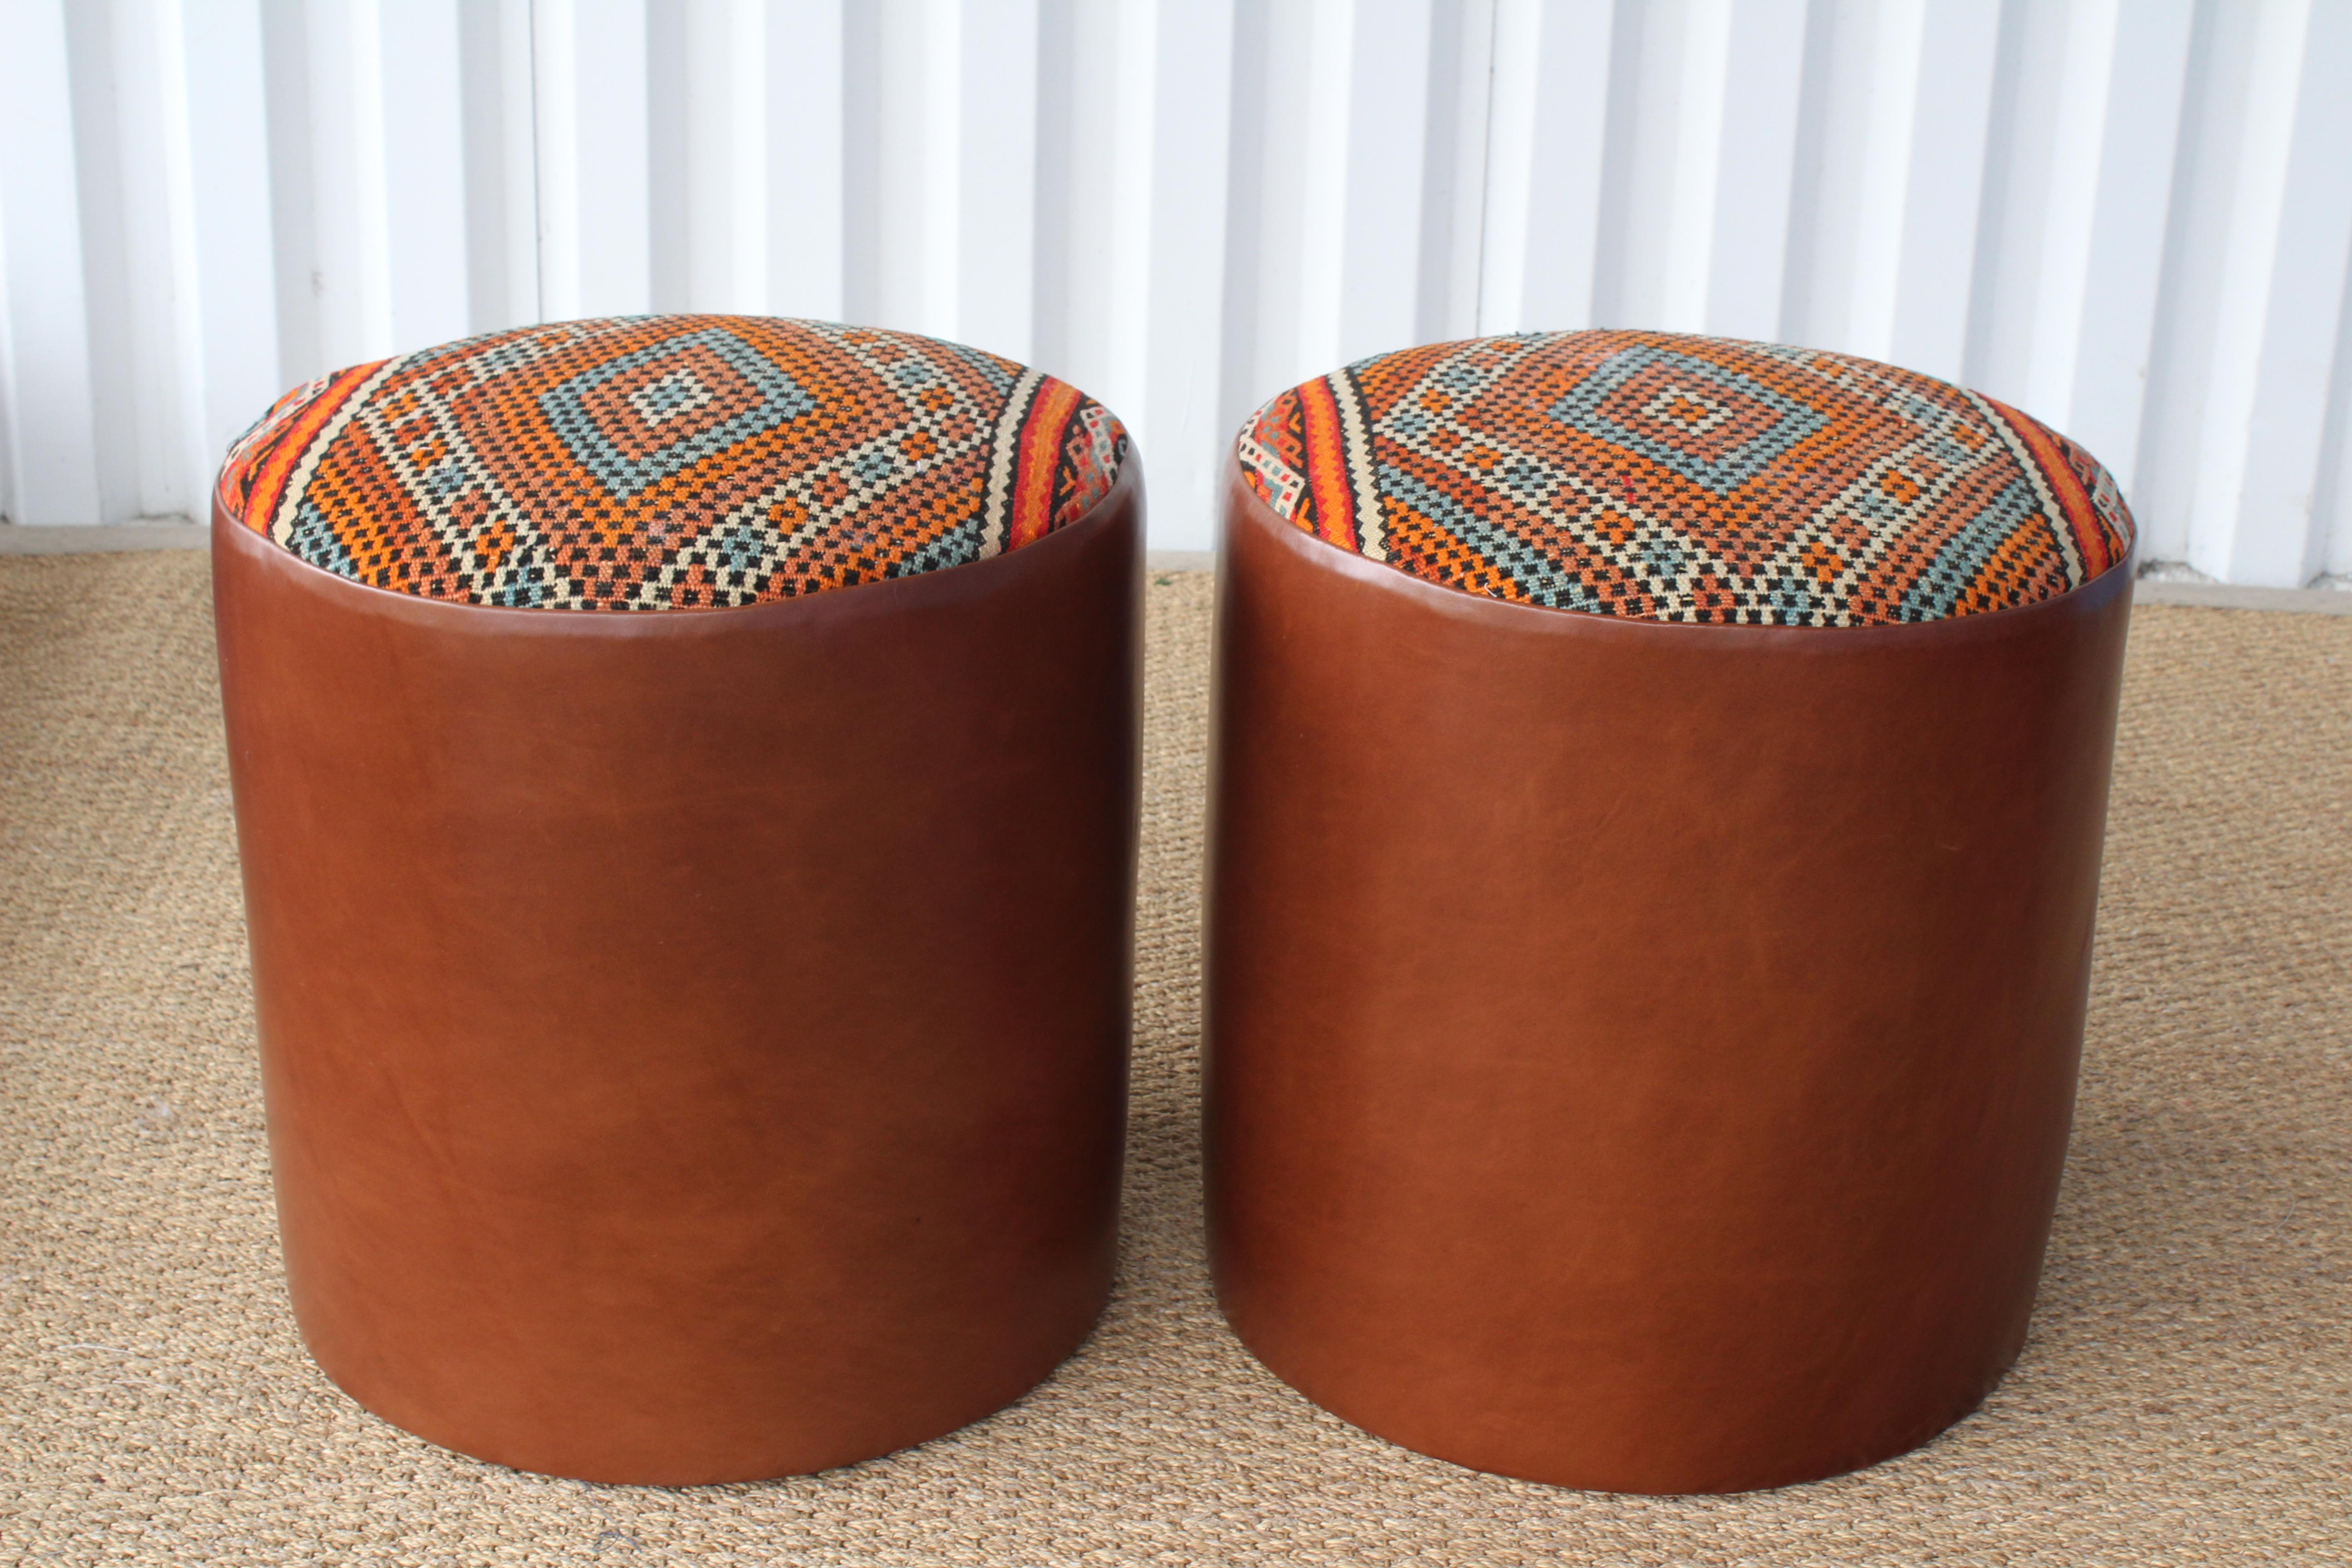 Pair of custom made stools or ottomans with genuine leather boxing and upholstered seats in a vintage wool Moroccan rug from the 1960s. Sold as a pair. In excellent like new condition.